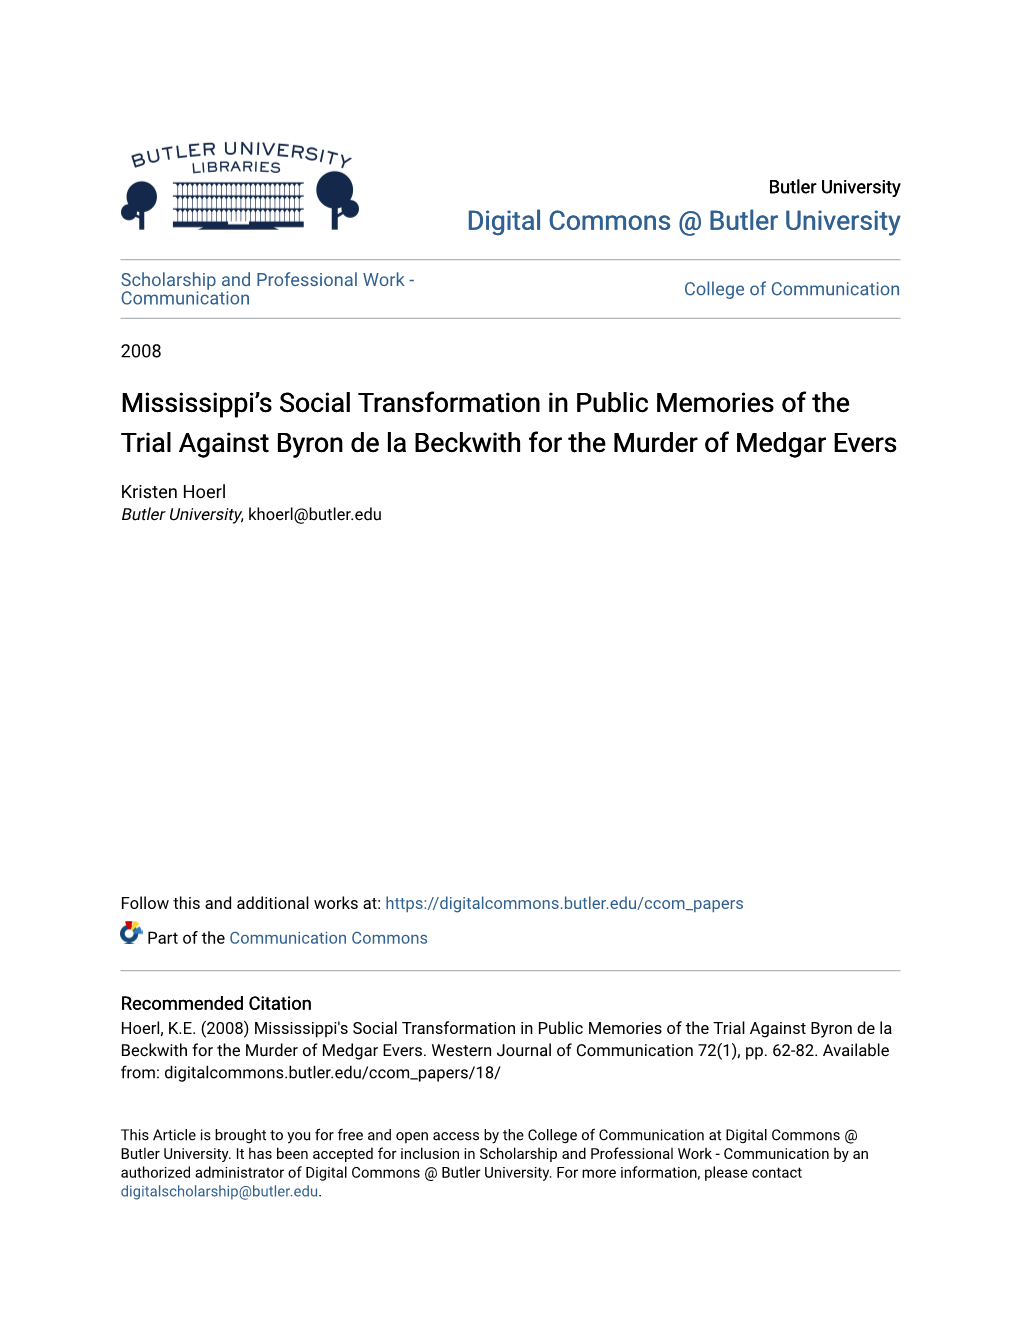 Mississippi's Social Transformation in Public Memories of the Trial Against Byron De La Beckwith for the Murder of Medgar Evers